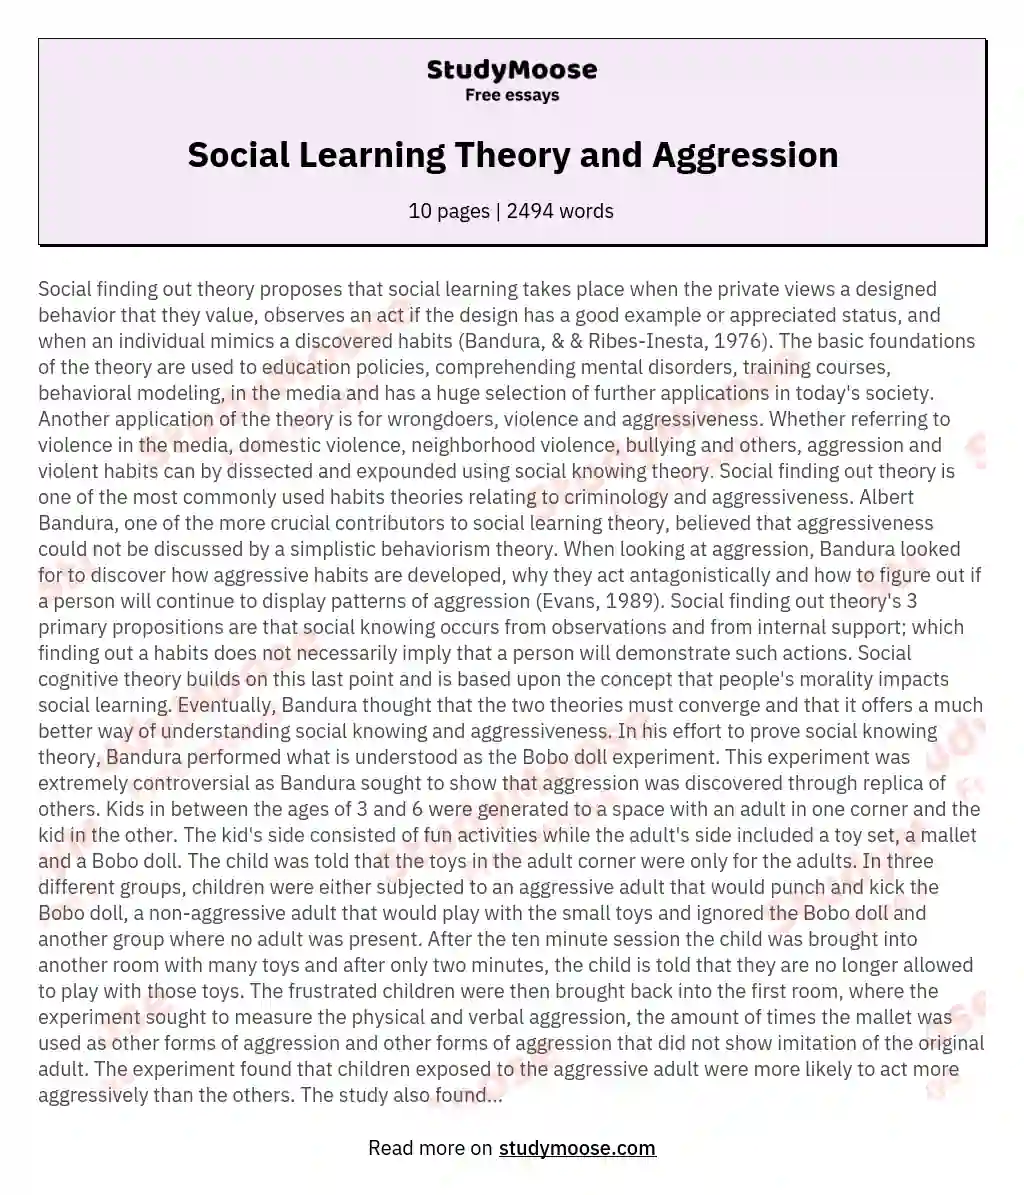 Social Learning Theory and Aggression essay